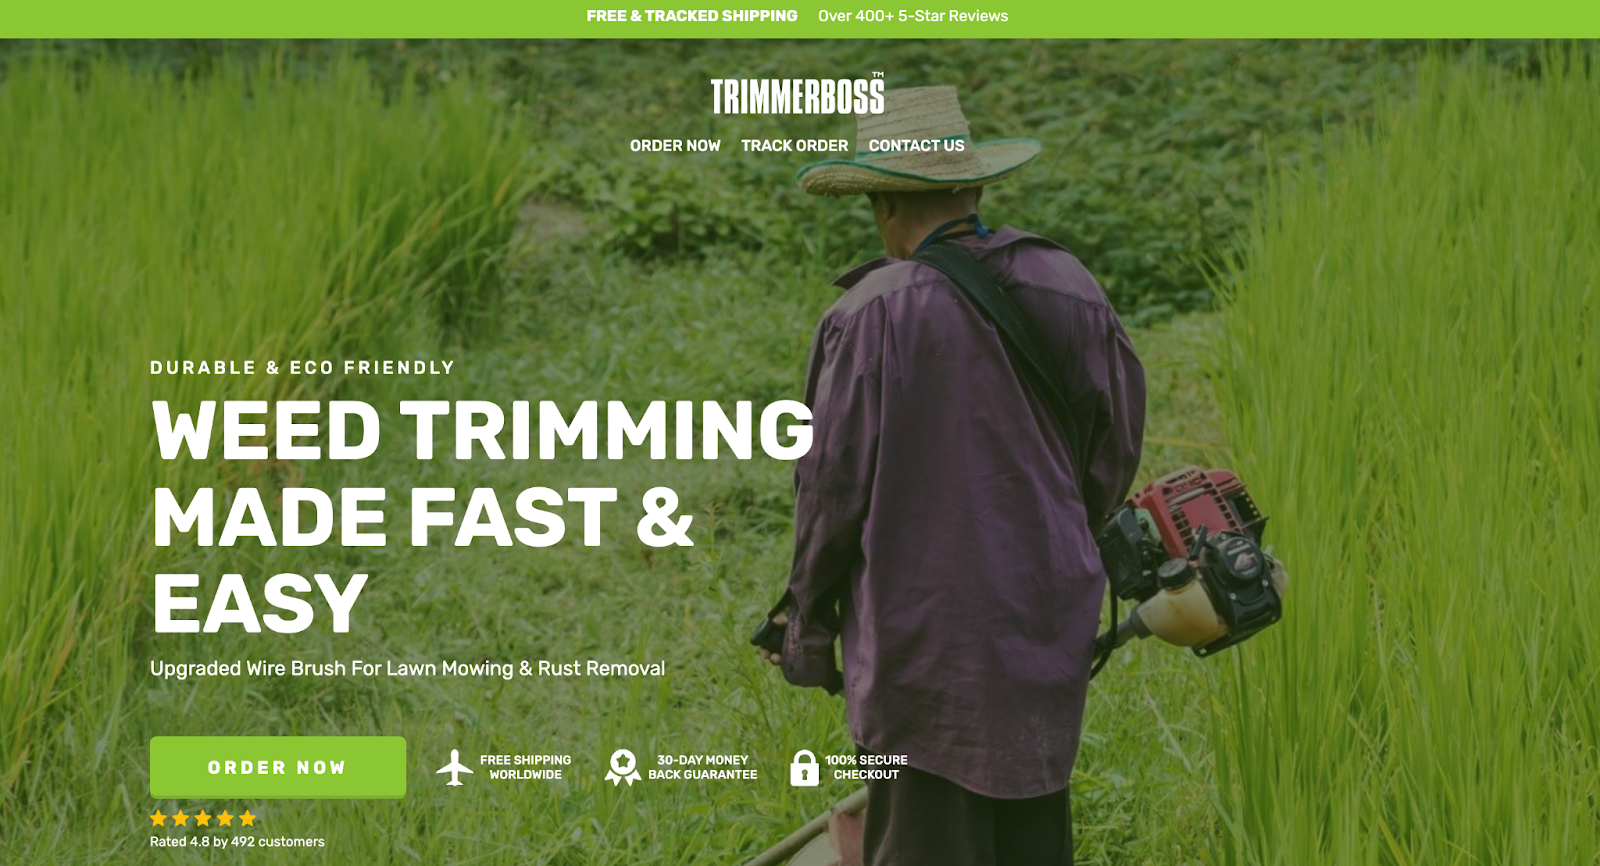 single product website example: Trimmer Boss